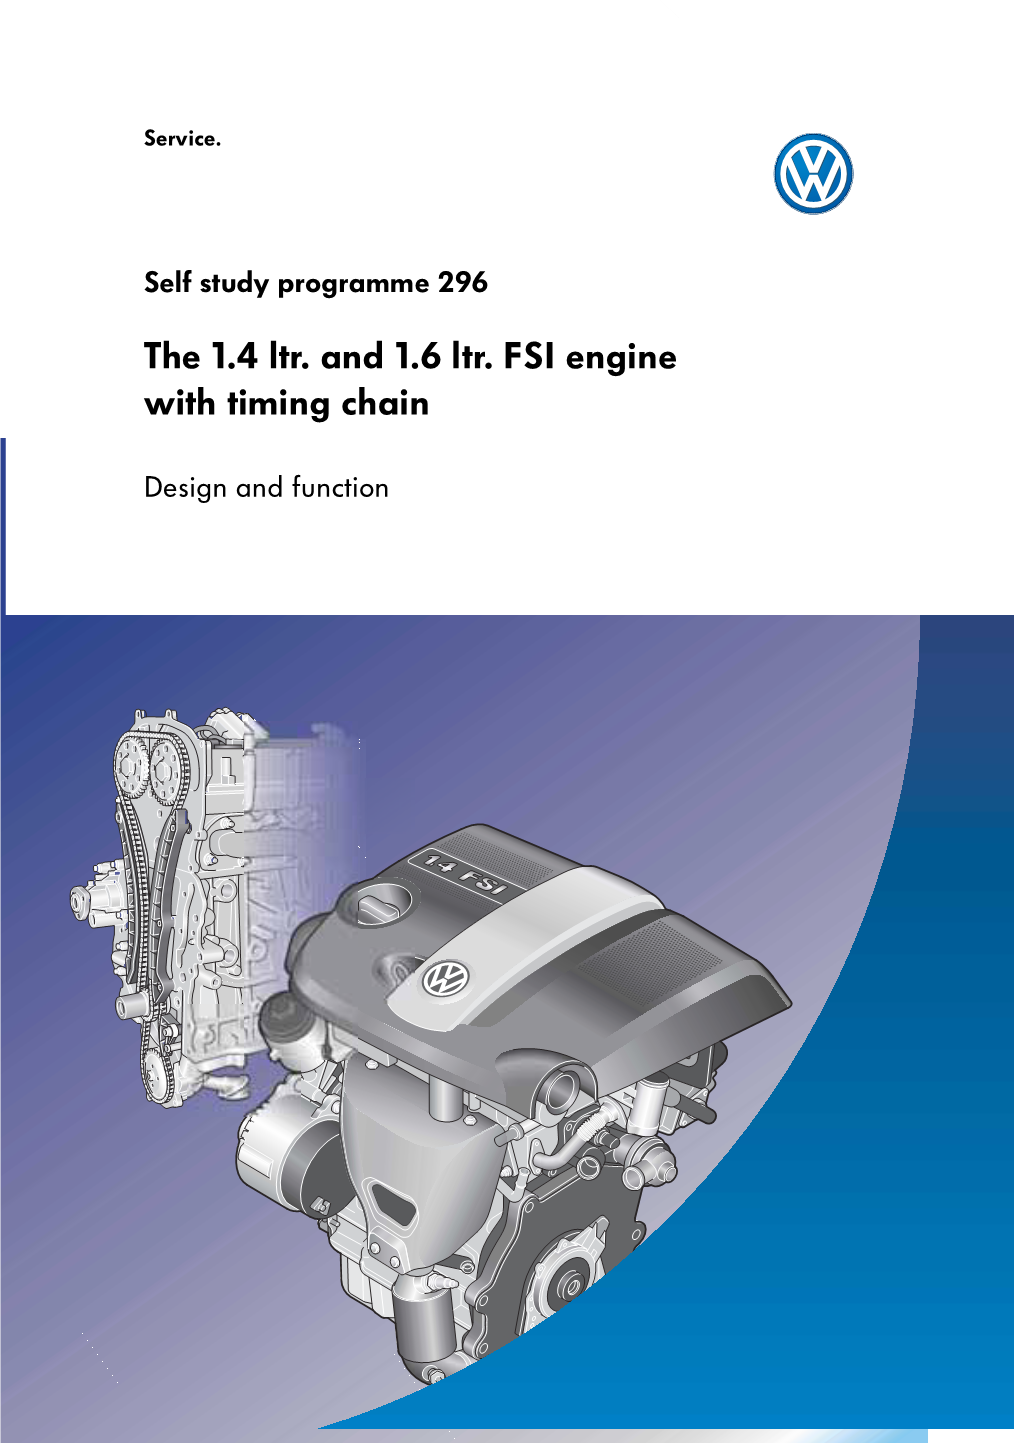 Ssp296 the 1.4 Ltr. and 1.6 Ltr. FSI Engine with Timing Chain